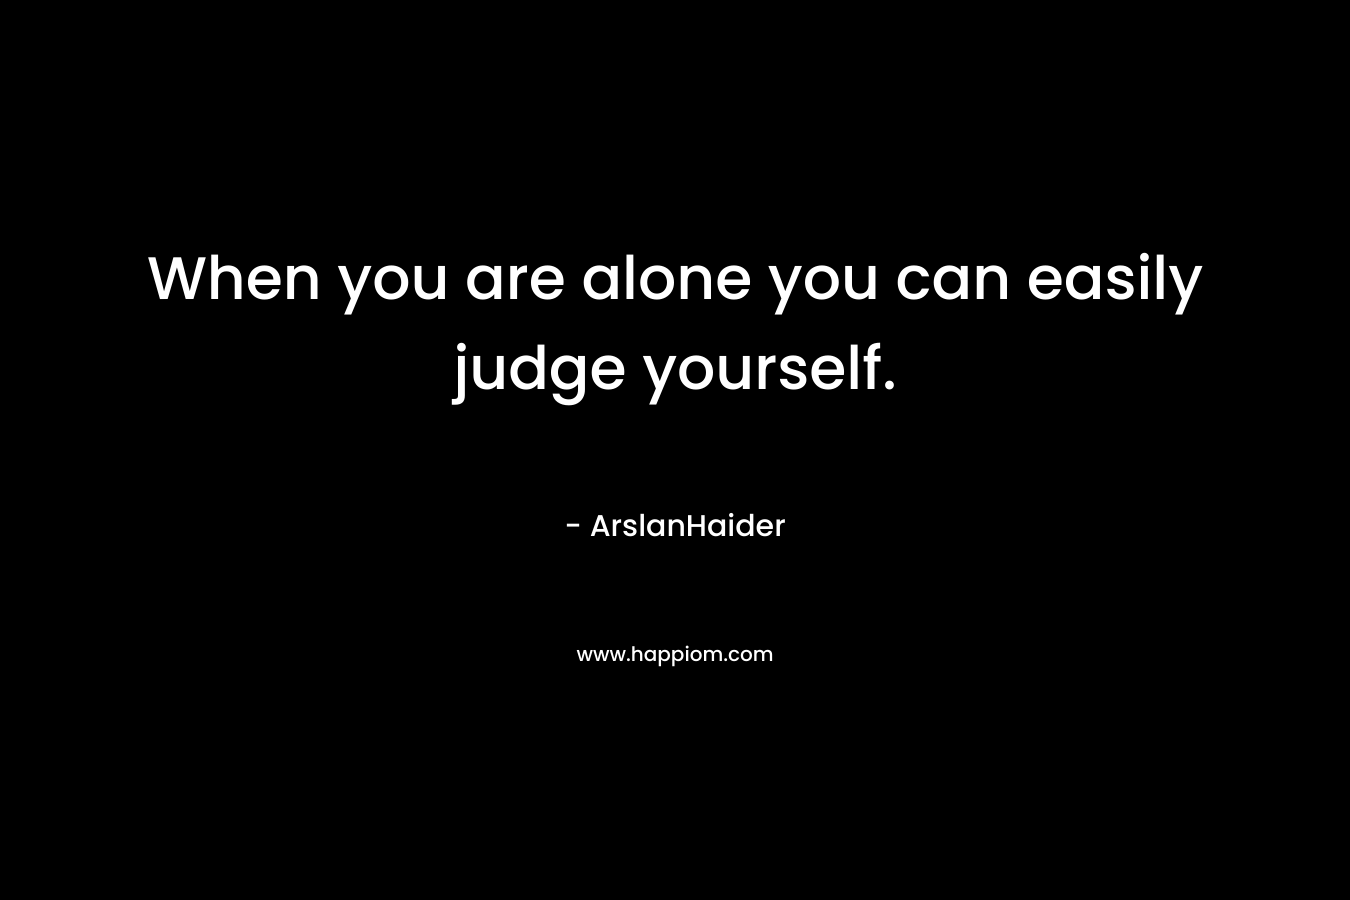 When you are alone you can easily judge yourself.